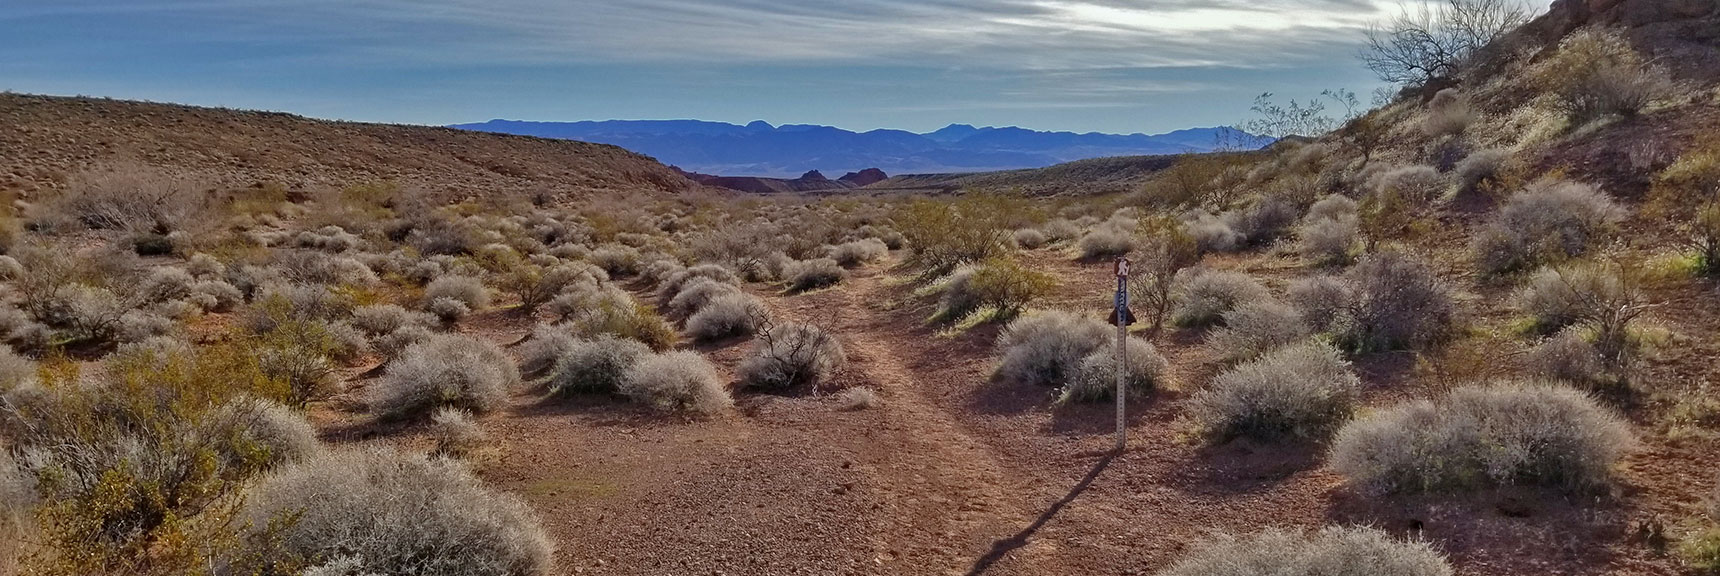 Traveling East Above Wash on Old Arrowhead Trail in Valley of Fire State Park, Nevada